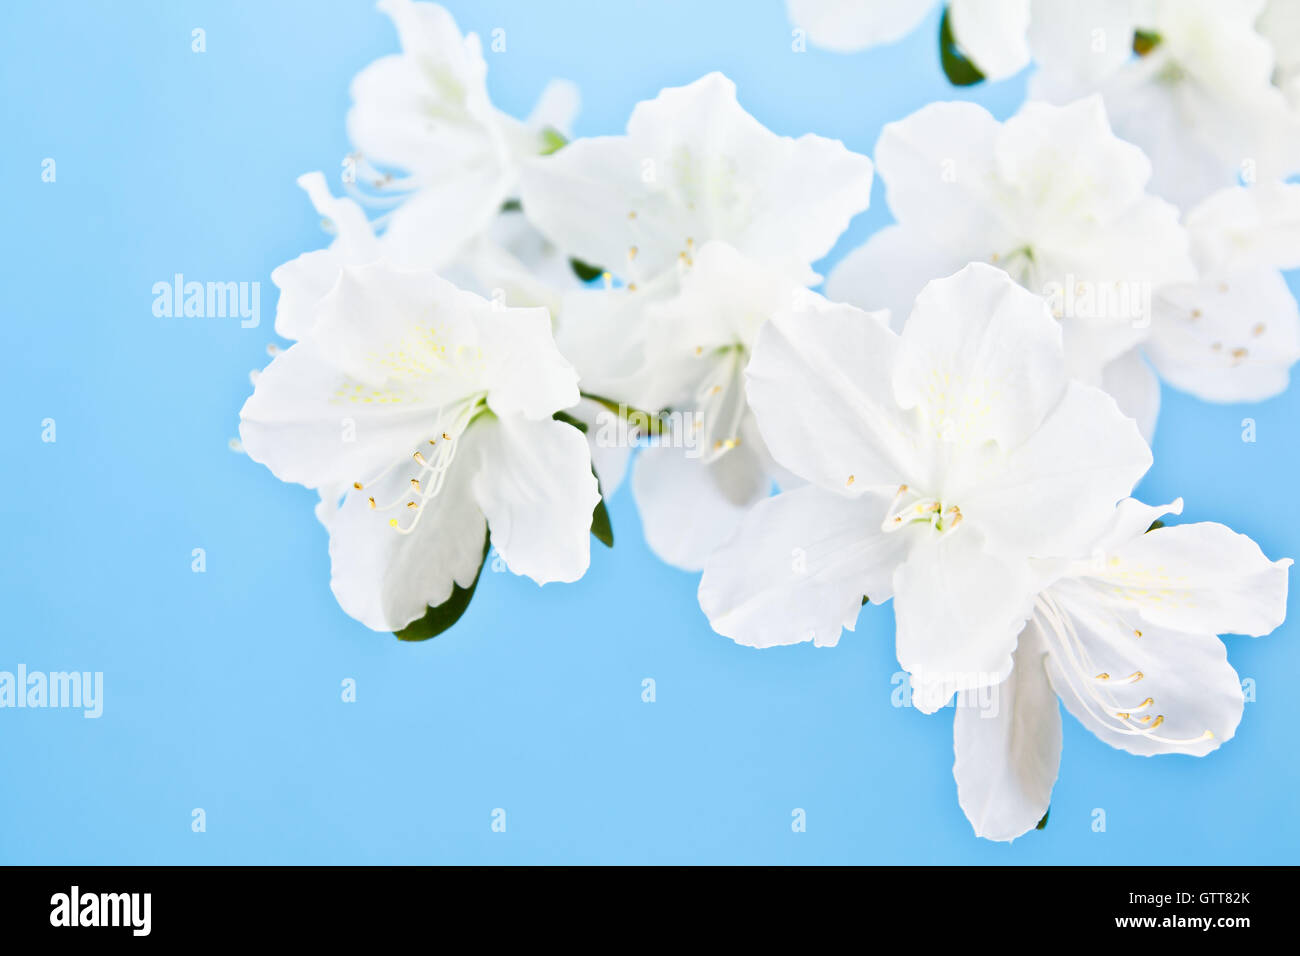 Close-up of white azalea blossom cluster against a blue background. Stock Photo